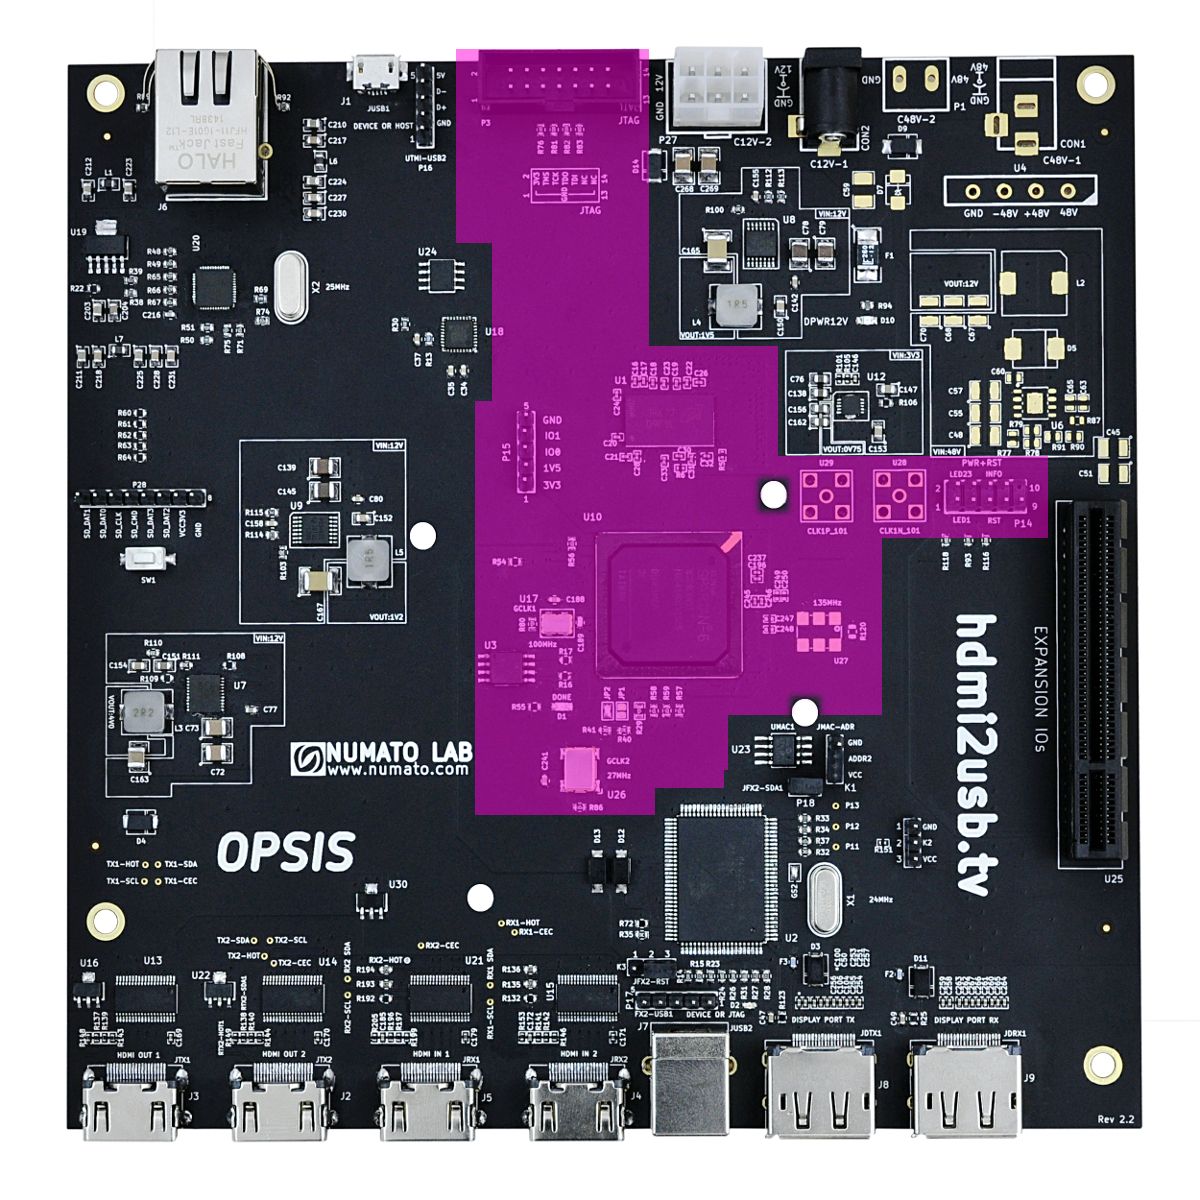 FPGA on the Opsis